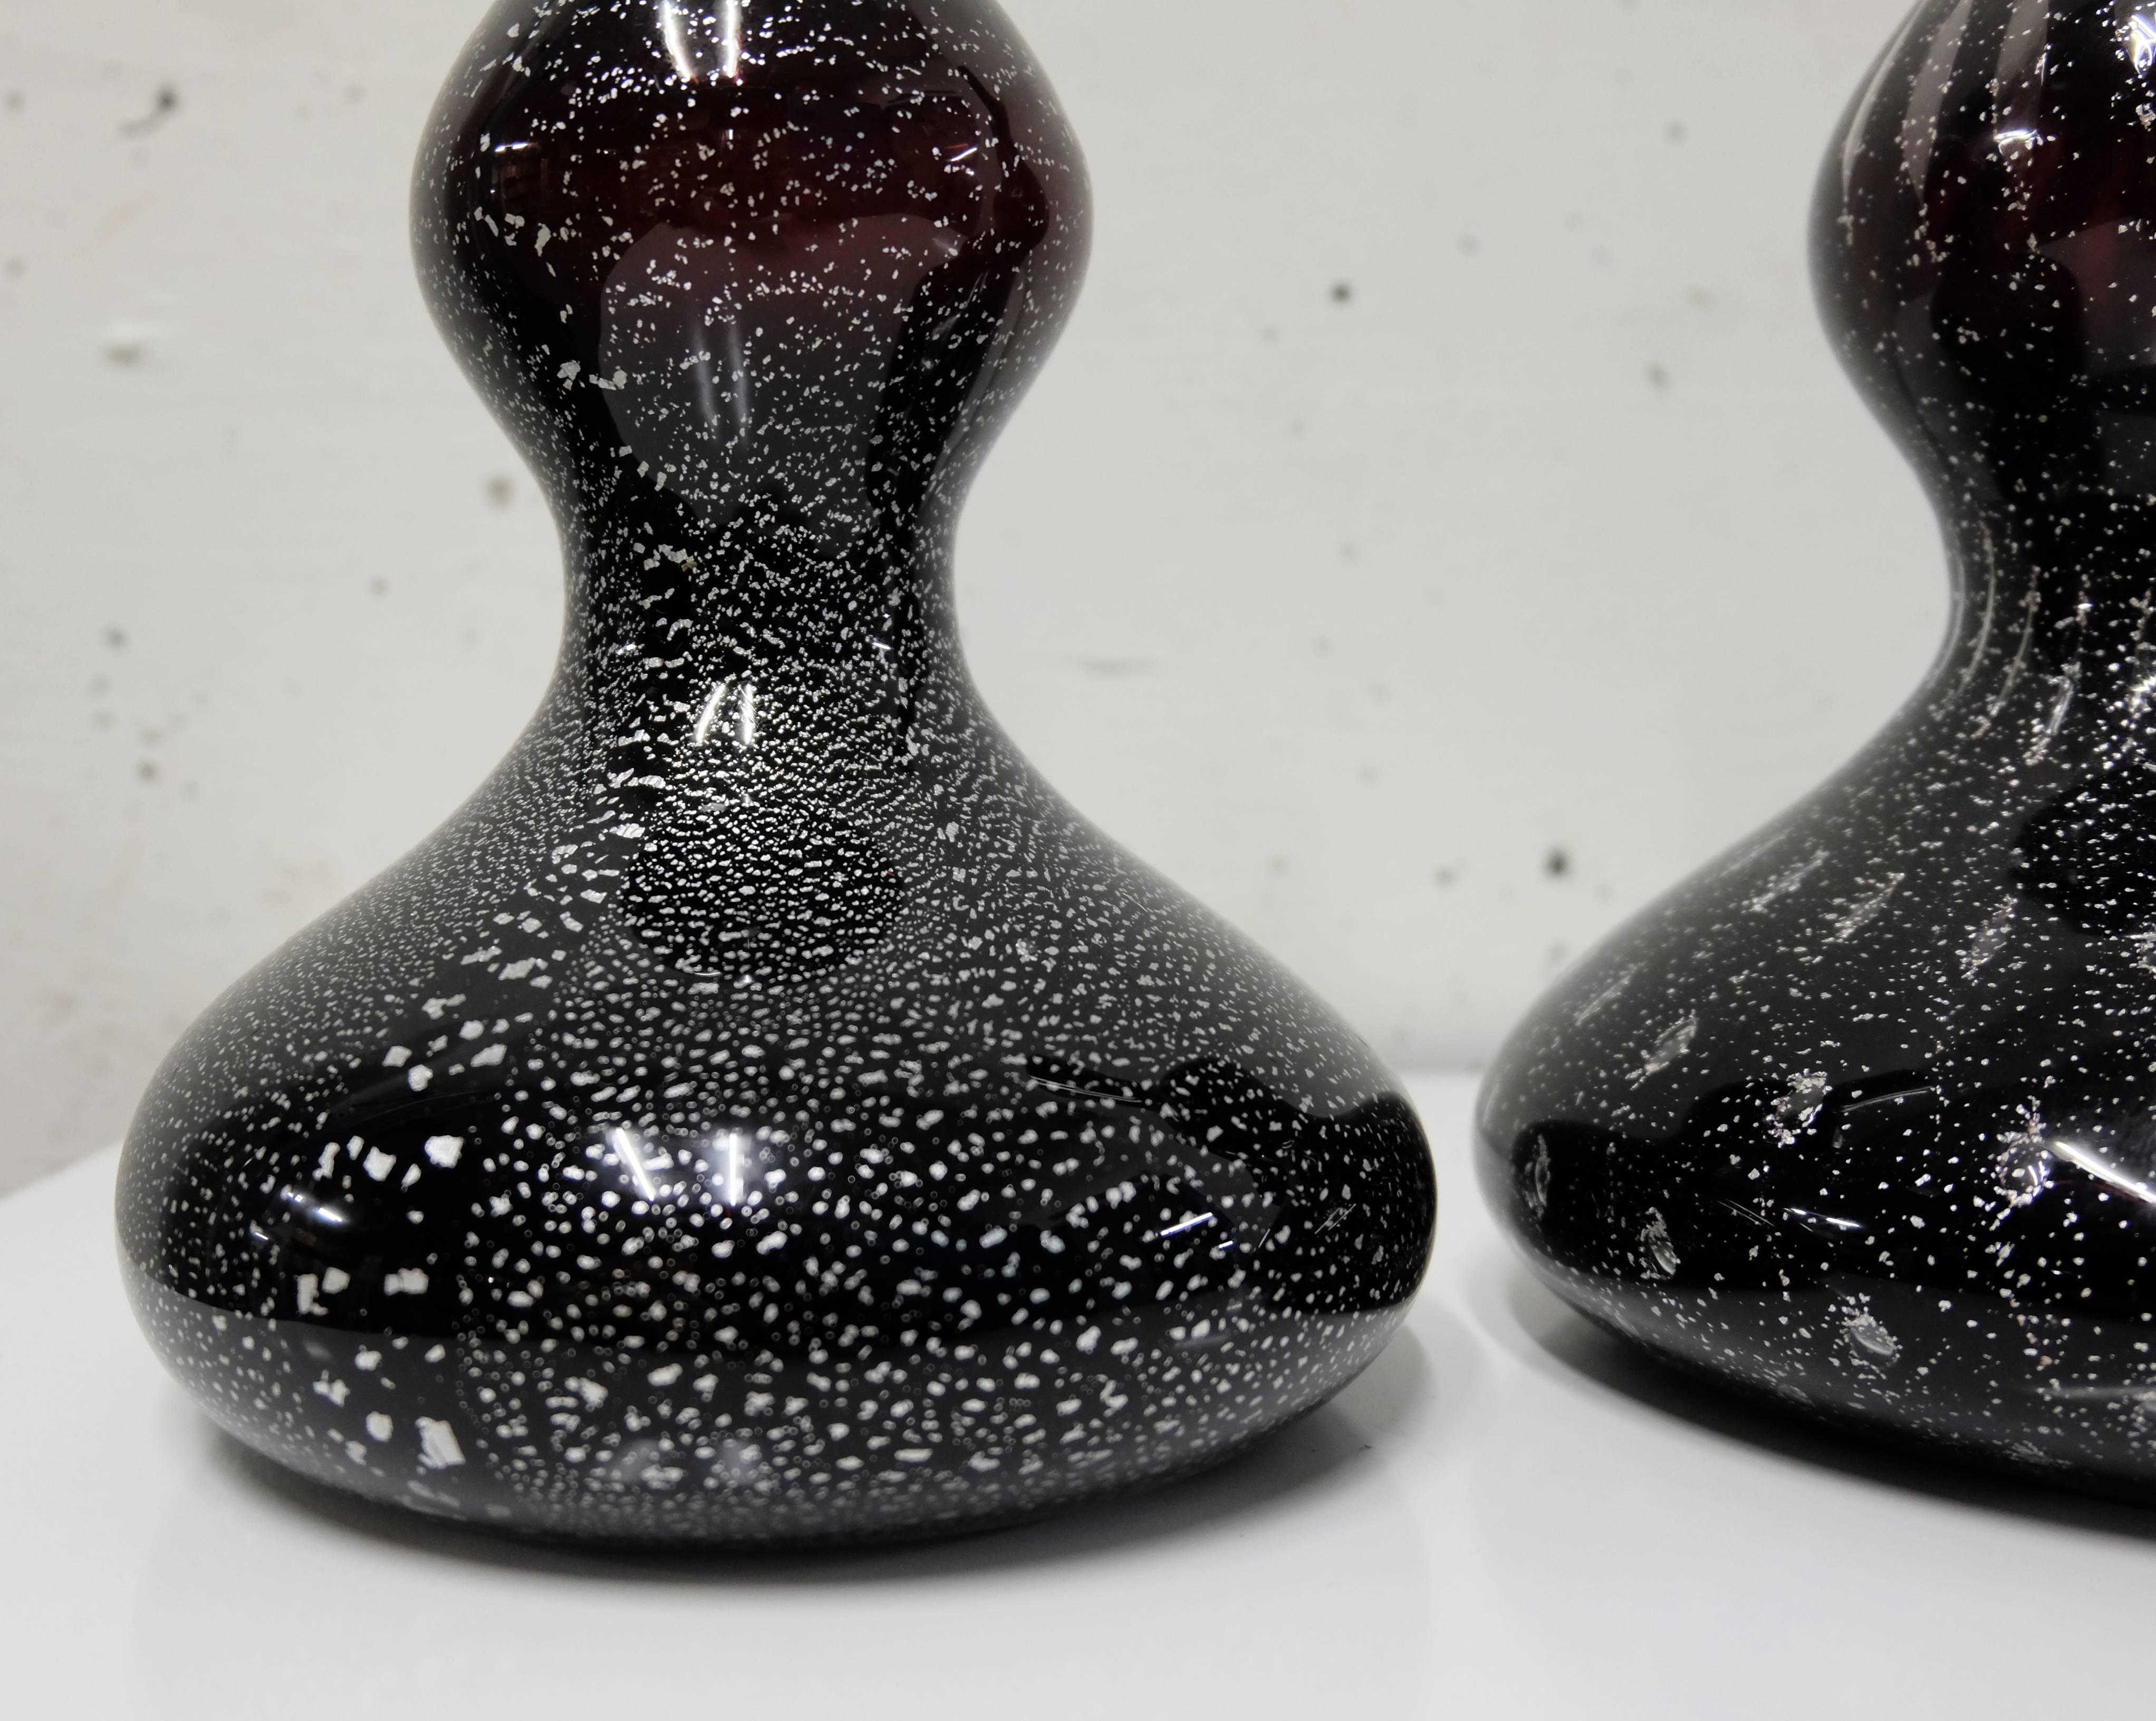 3 black soliflor vases designed by swiss architect Christian Geissbuhler with Compania Vetraria Muranese in Murano Venezia
Blown black Murano glass with silver inlays, all different
Purple reflections when enlightened
Signed and numbered
